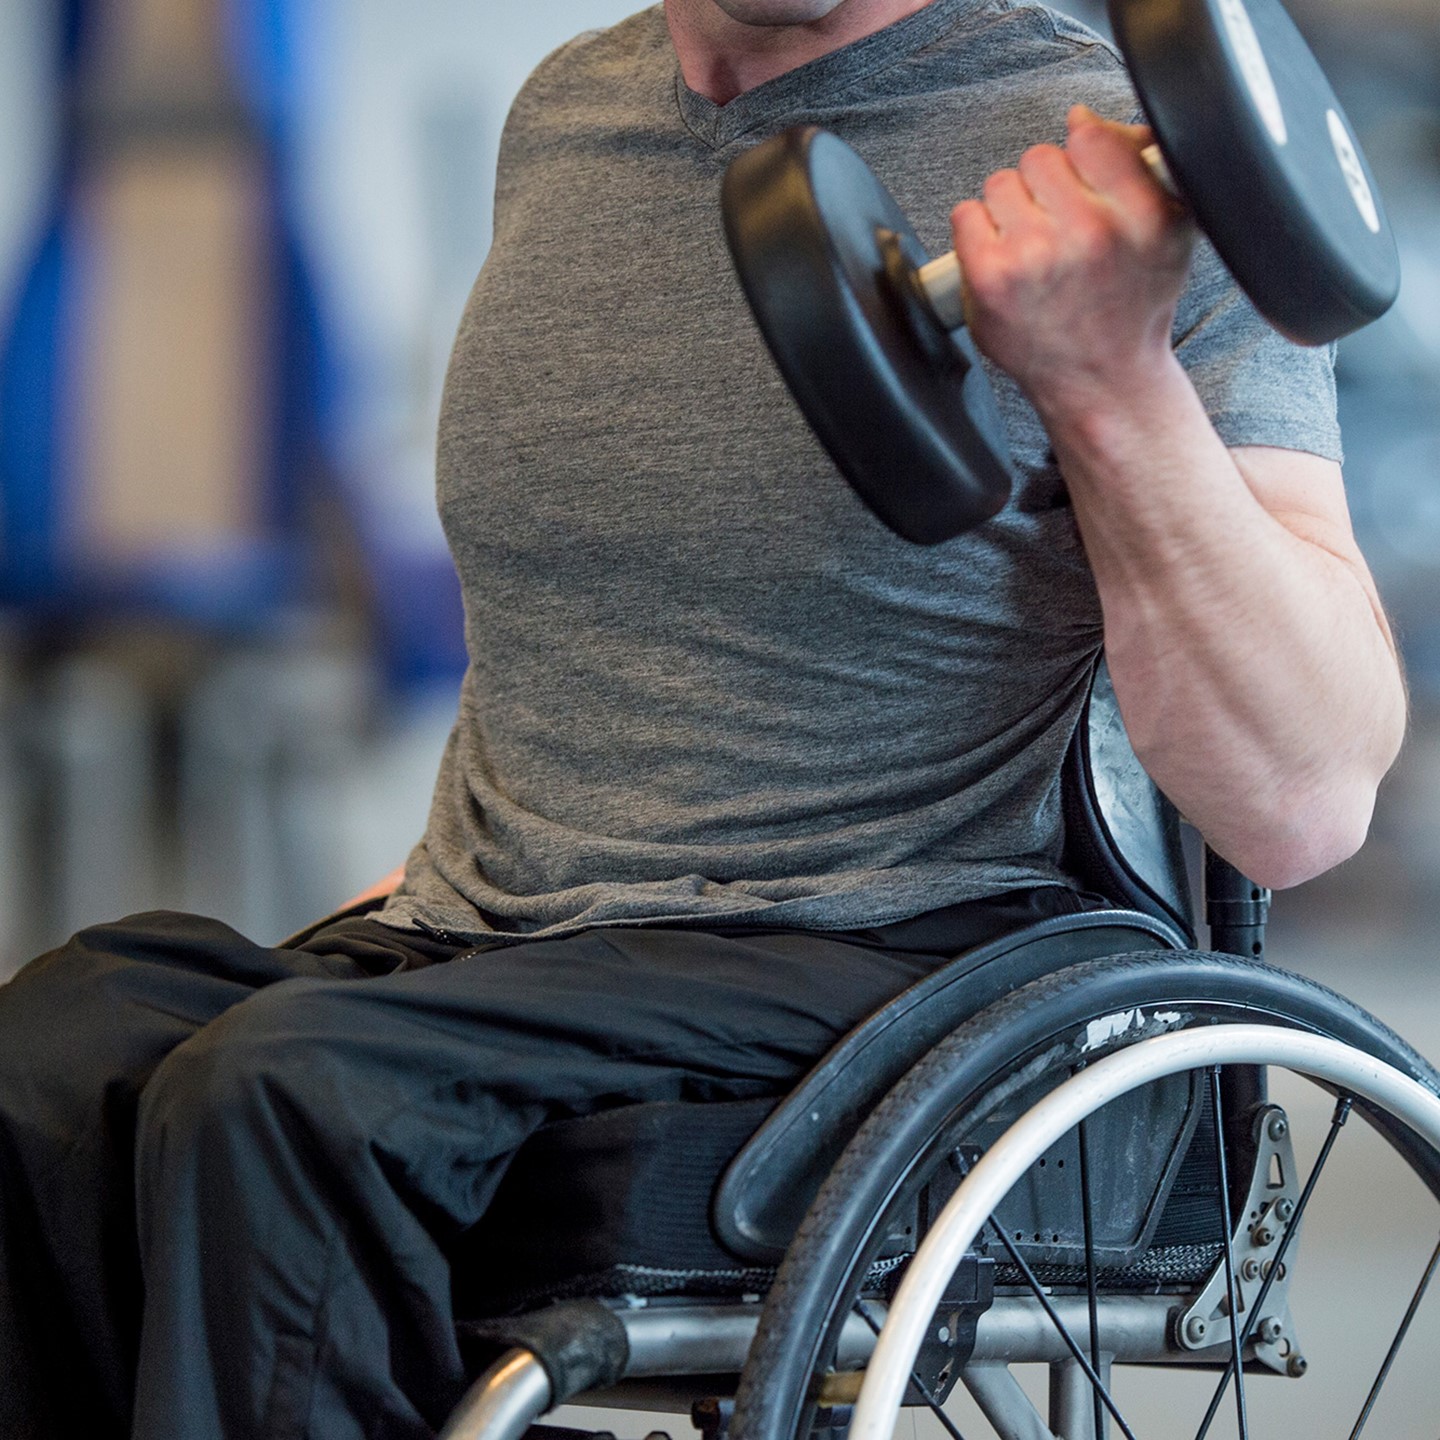 Disabled man lifting dumbbells in a wheelchair